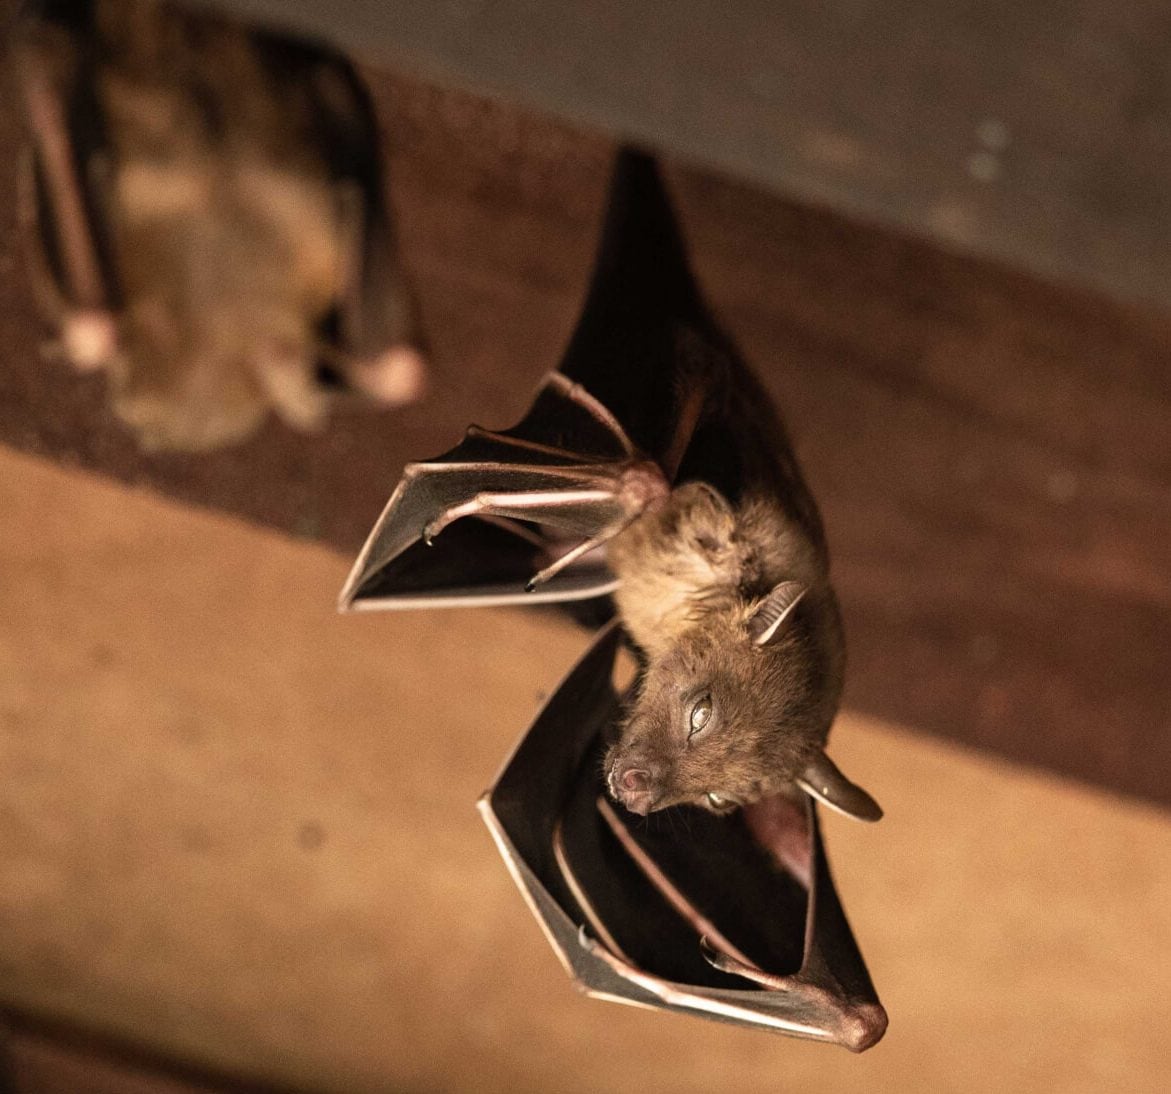 Expert bat removal services for a safe and humane solution in Philadelphia